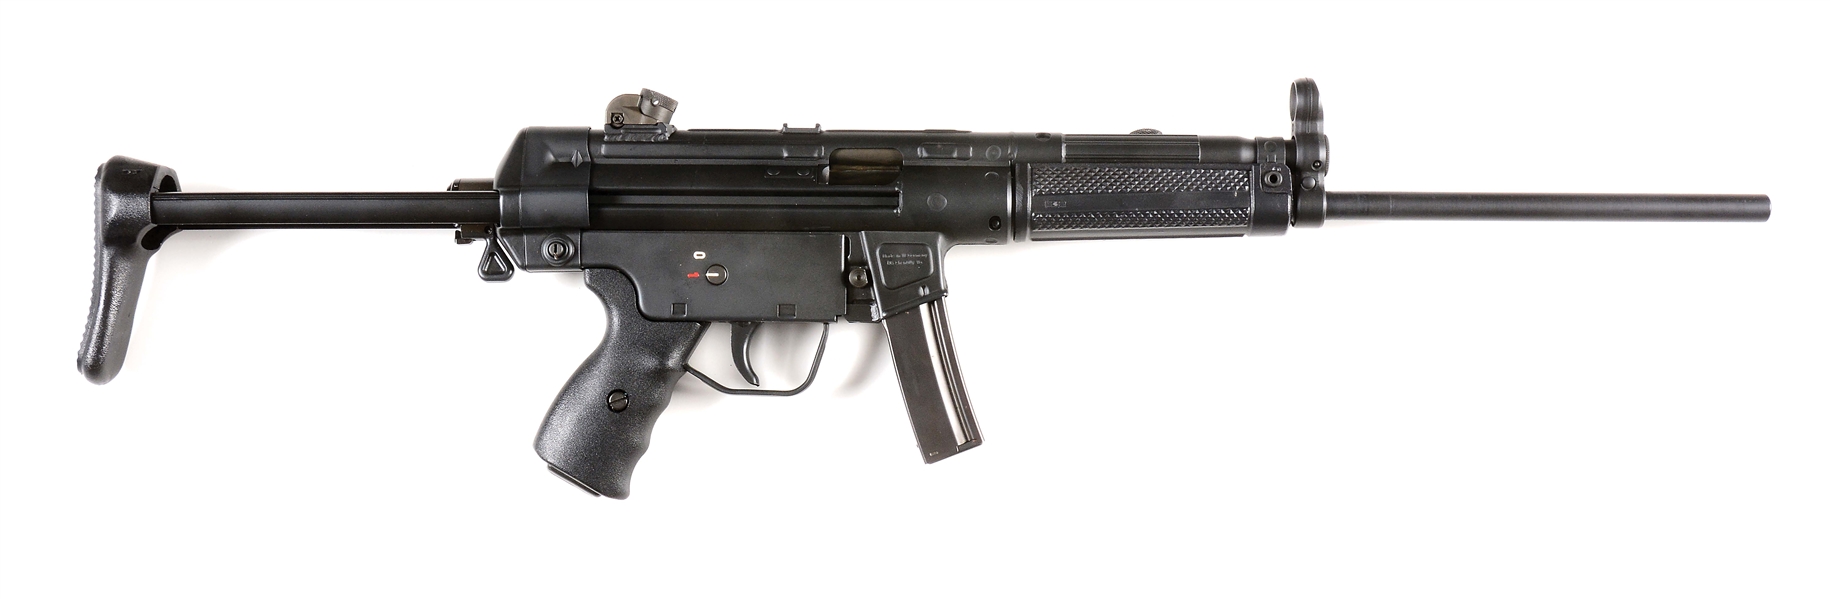 (M) A VERY GOOD PRE-BAN HECKLER & KOCH HK94A3 SEMI-AUTOMATIC RIFLE WITH EXTRA MAGAZINE AND MANUAL.